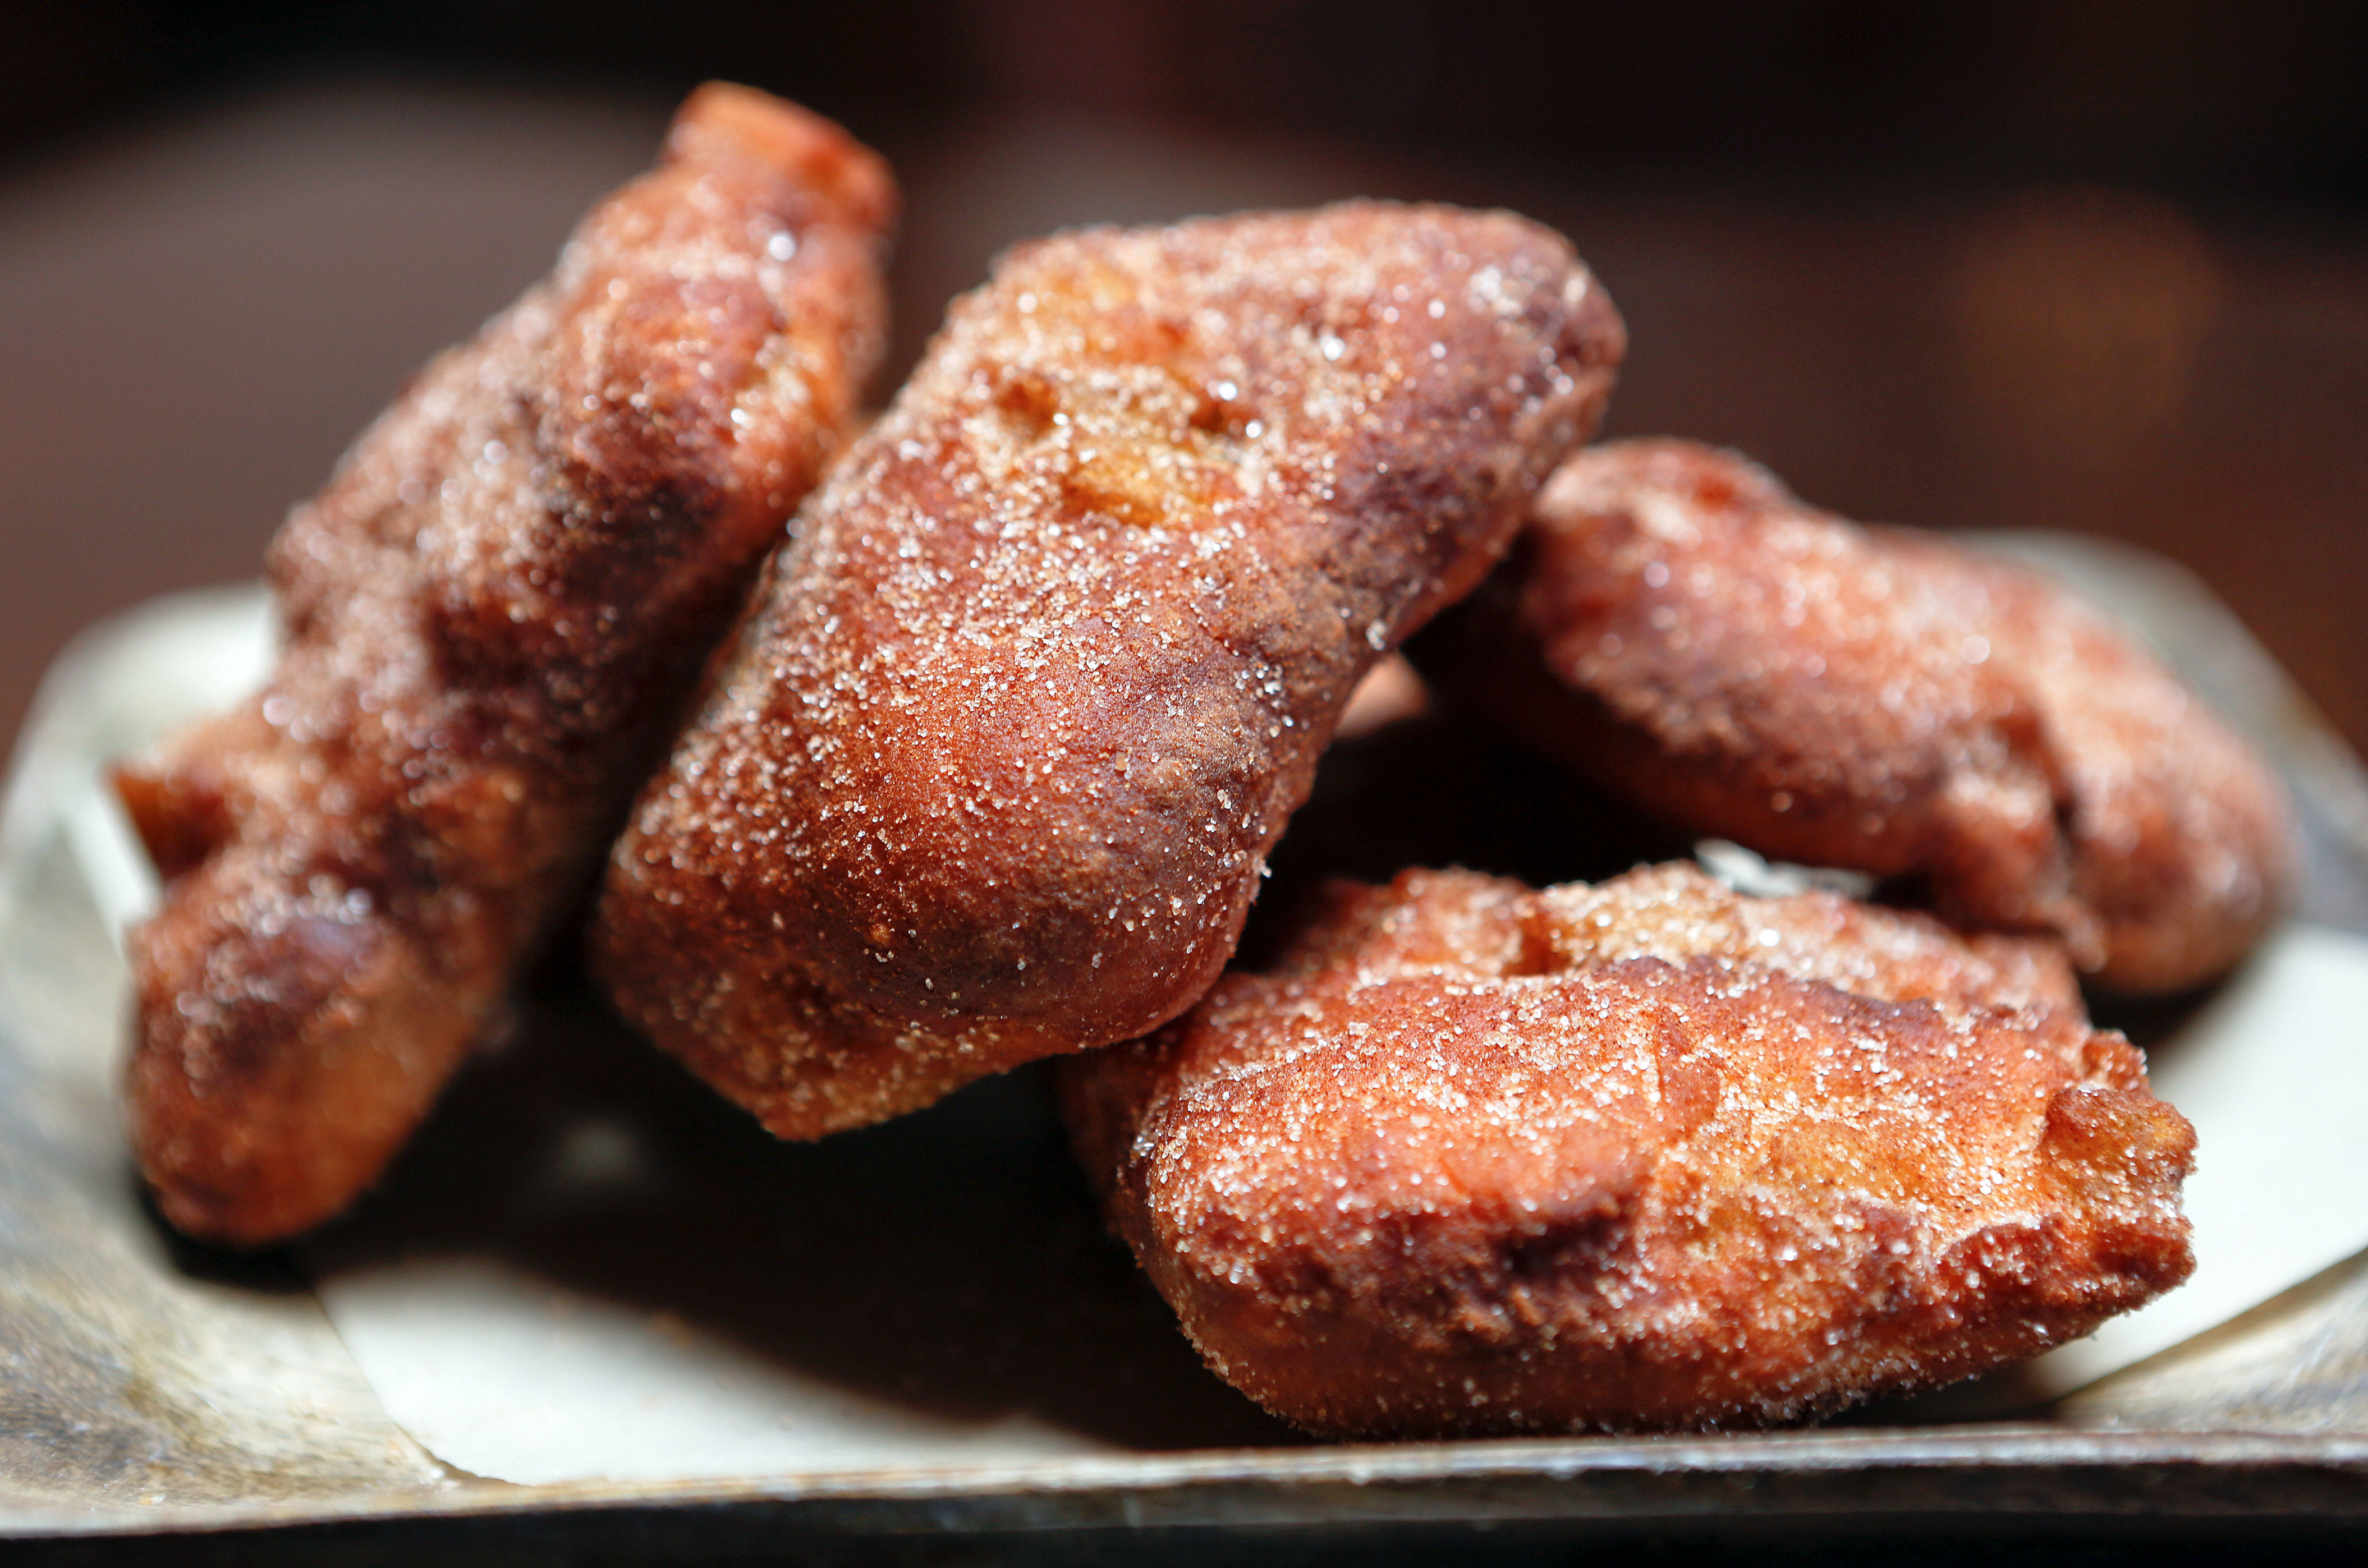 <p>Okay, maybe this one is more for breakfast than for dessert. Start Thanksgiving off right with <a href="http://thepioneerwoman.com/cooking/apple-fritters/">these apple fritters from The Pioneer Woman</a> to hold everyone over until dinner. </p><p>You may also like: <a href='https://www.yardbarker.com/lifestyle/articles/22_foods_that_are_high_in_saturated_fat_102623/s1__39059128'>22 foods that are high in saturated fat</a></p>